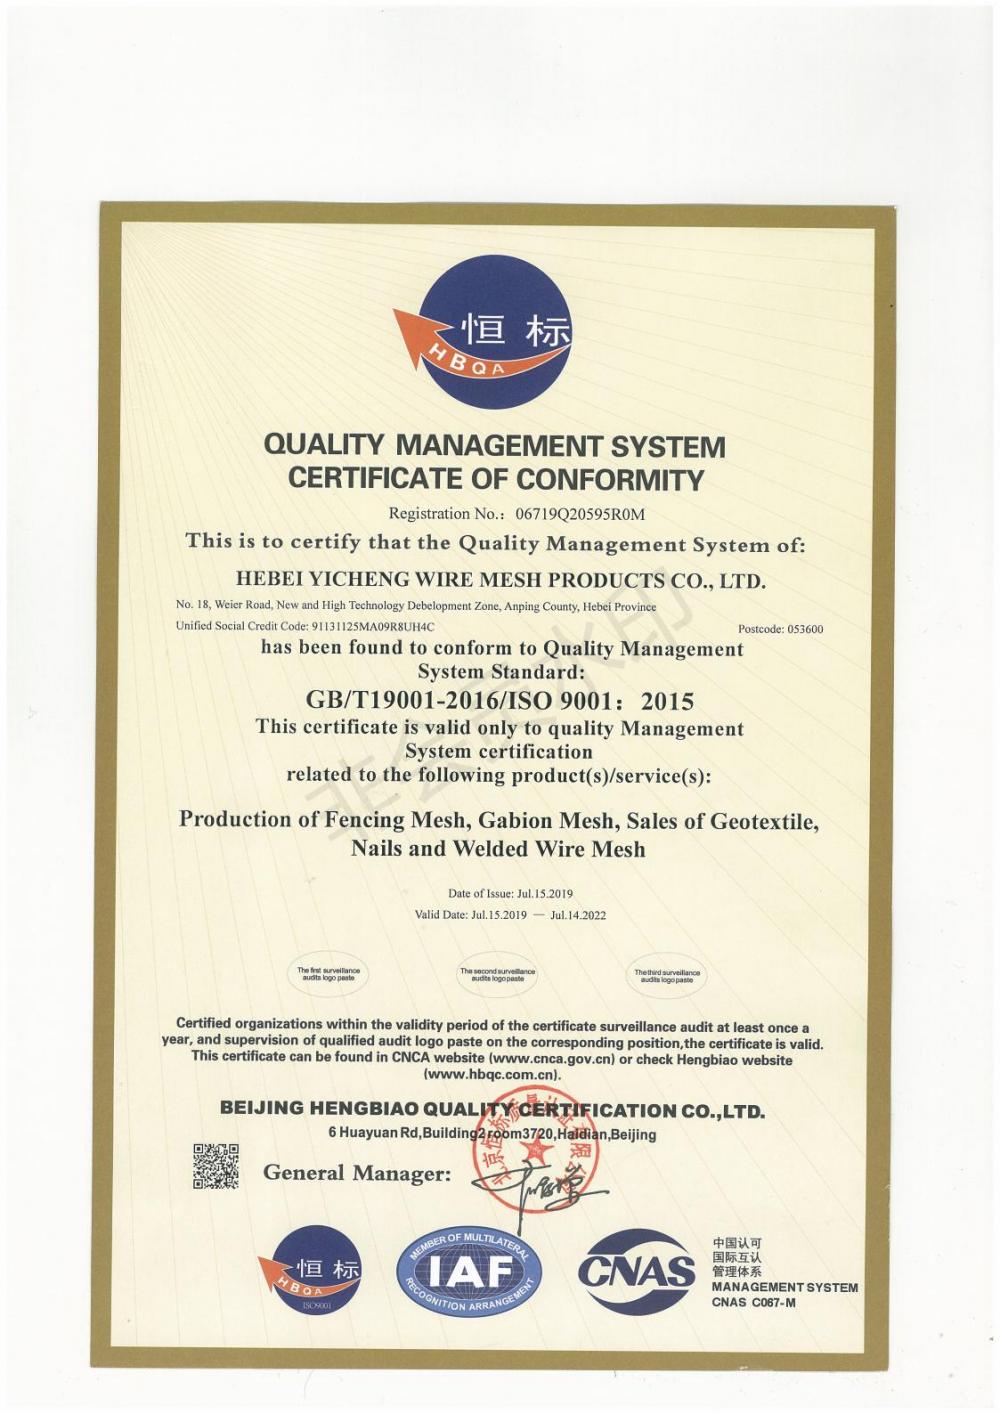 QUALITY MANAGEMENT SYSTEM CERTIFICATE OF CONFORMITY